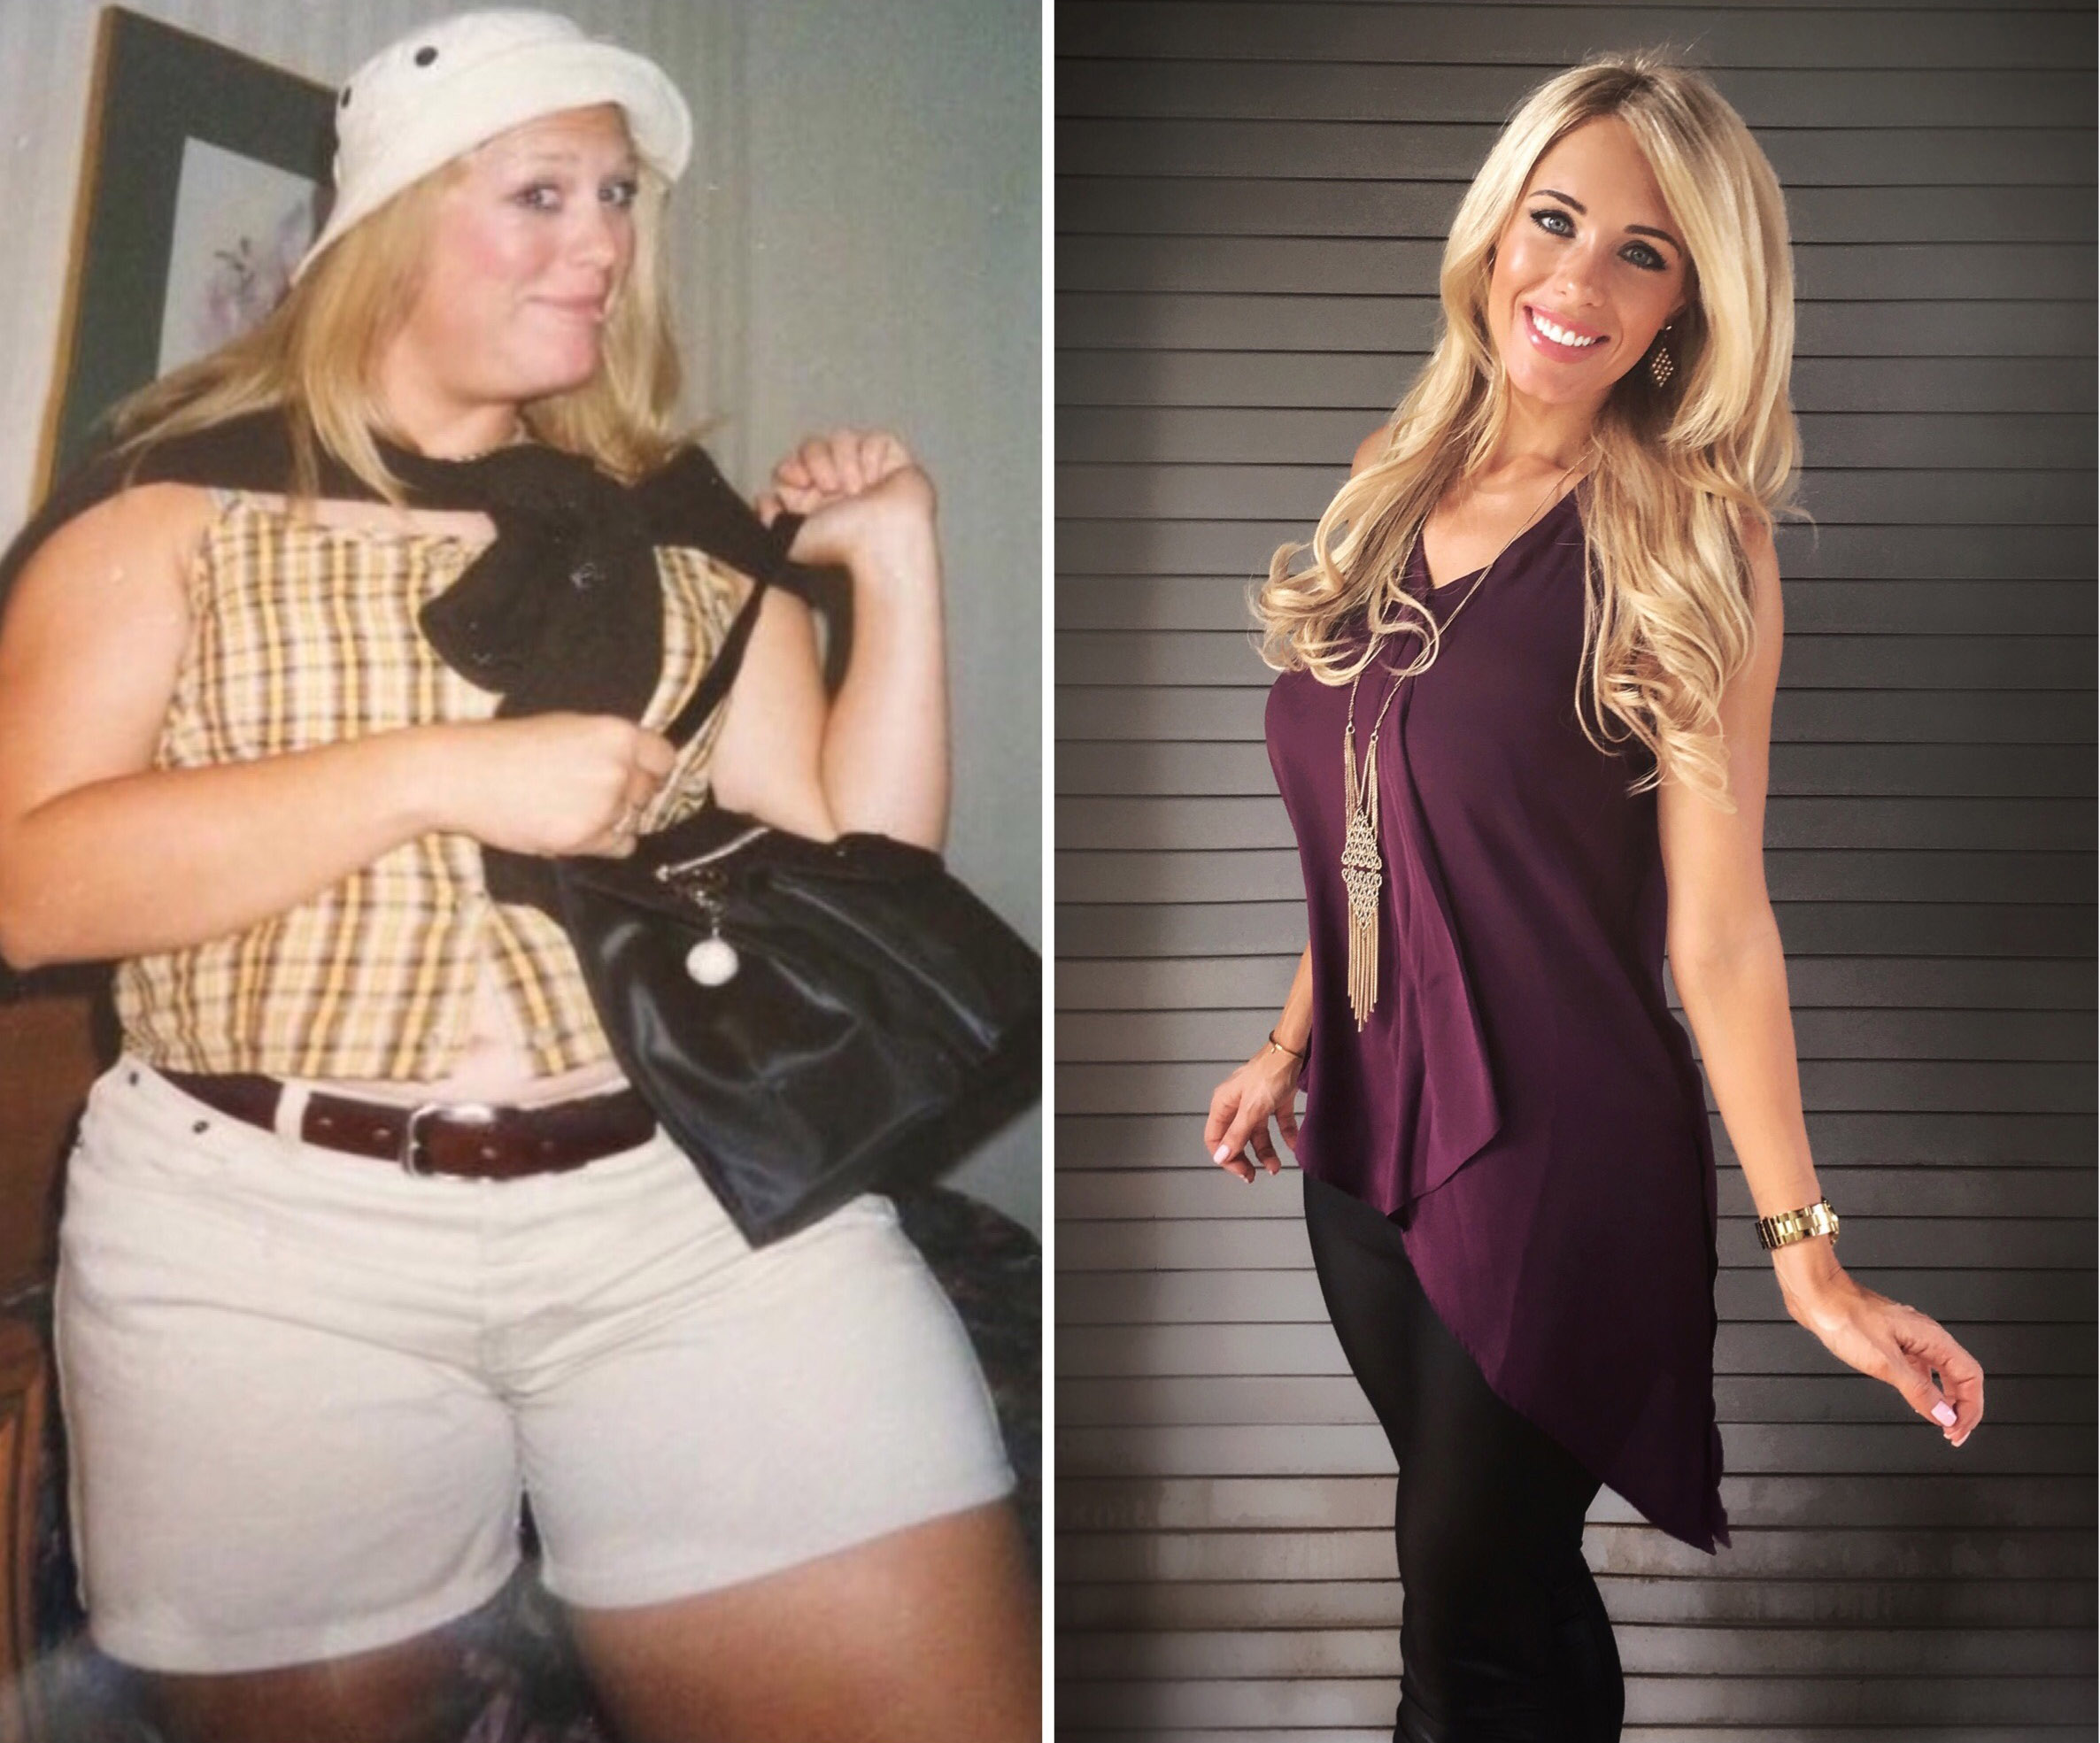 PHOTO: Christina Jordan, 34, of Phoenix, Arizona, lost more than 130 pounds and now works as a nutritionist.